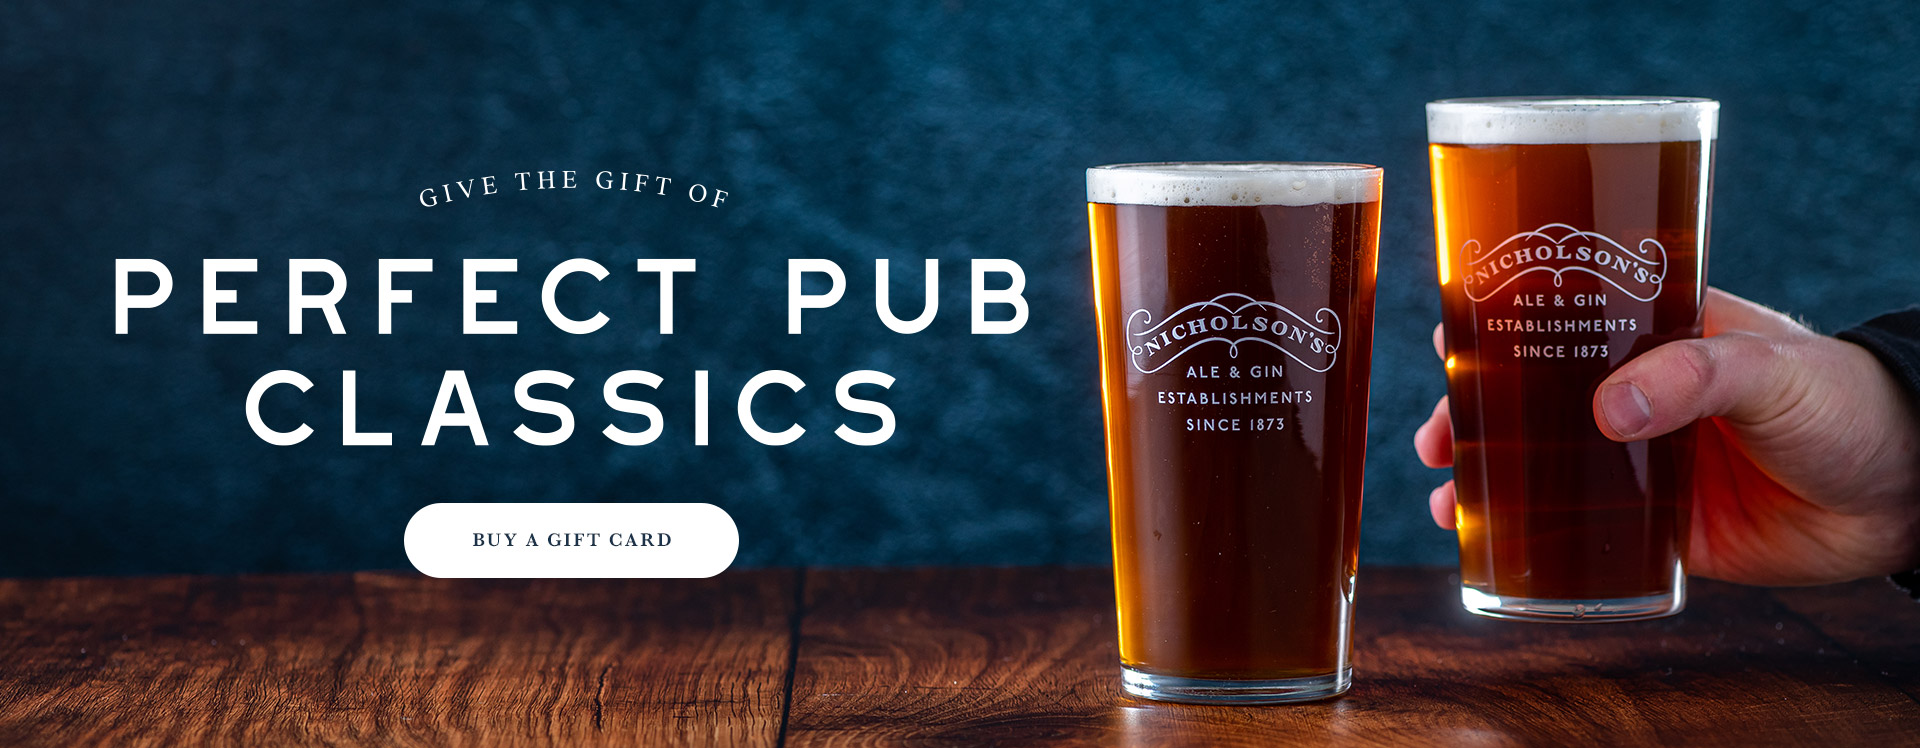 Nicholson’s Pub Gift Voucher at The Victoria Comet in Newcastle-Upon-Tyne